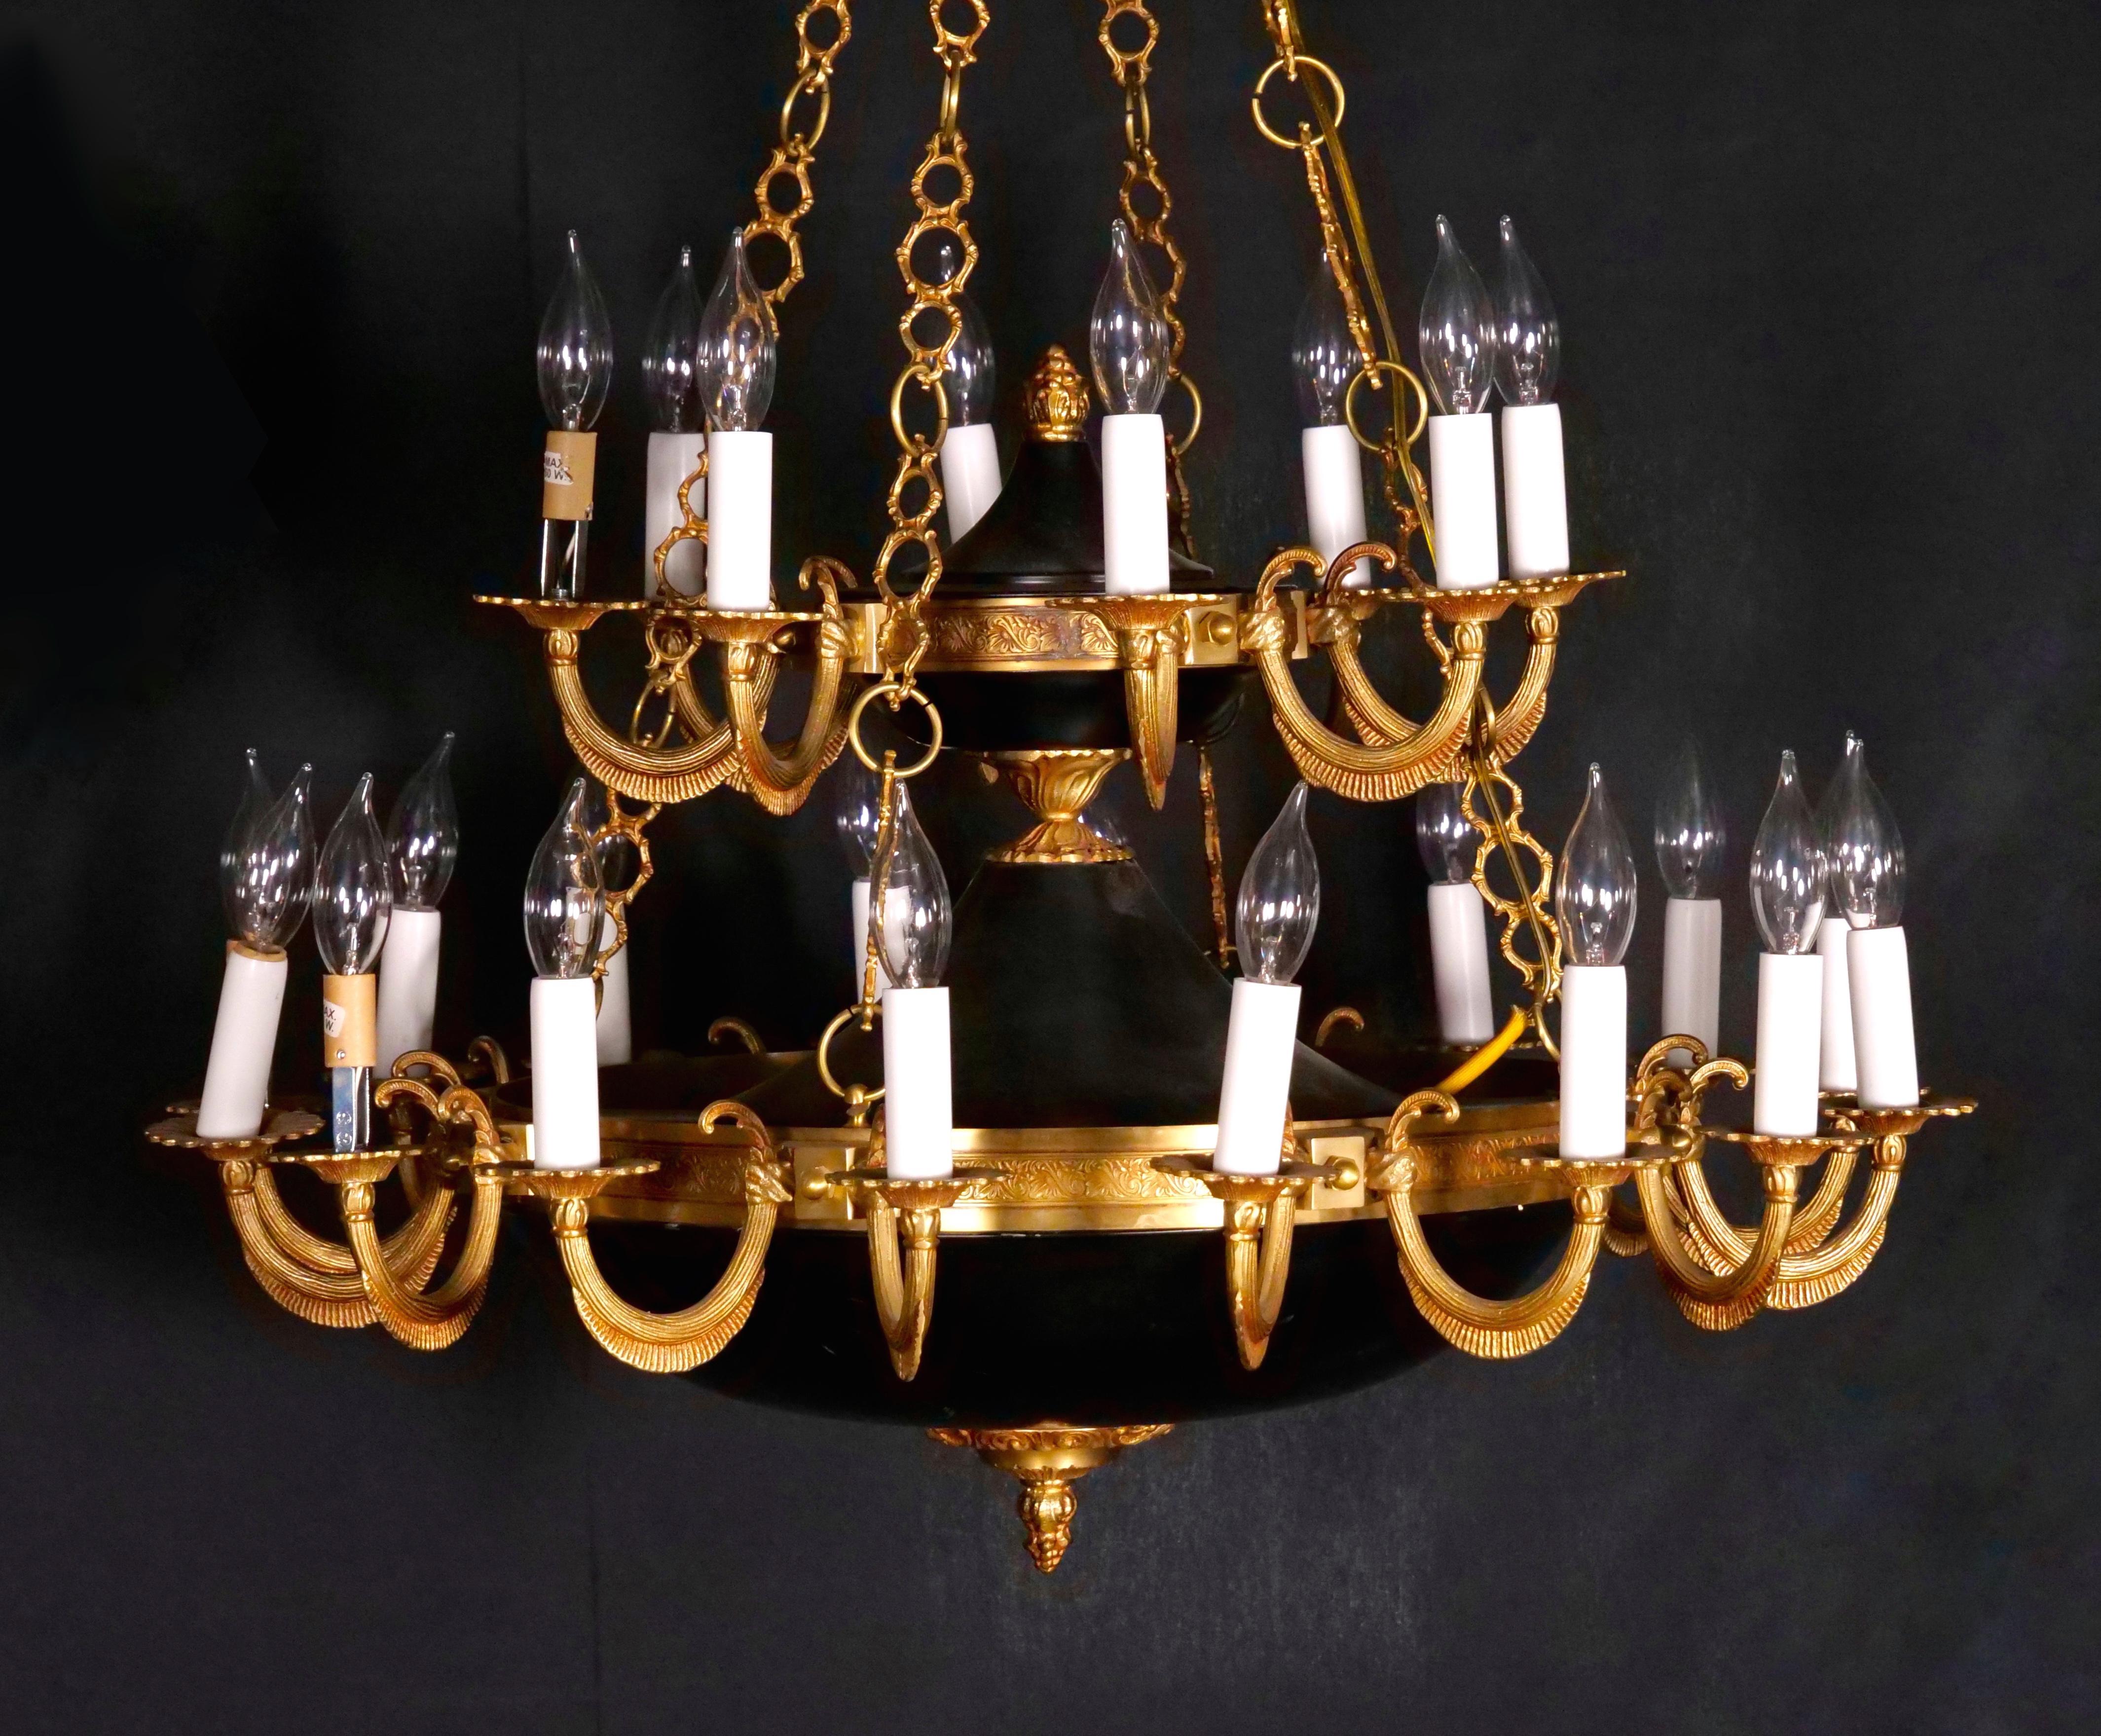 Illuminate your space with grandeur using this extraordinary 19th Century French Empire Style Chandelier. Crafted from two imposing circular charcoal-patinated balusters suspended by four ornate gilt bronze chains, this chandelier is a magnificent